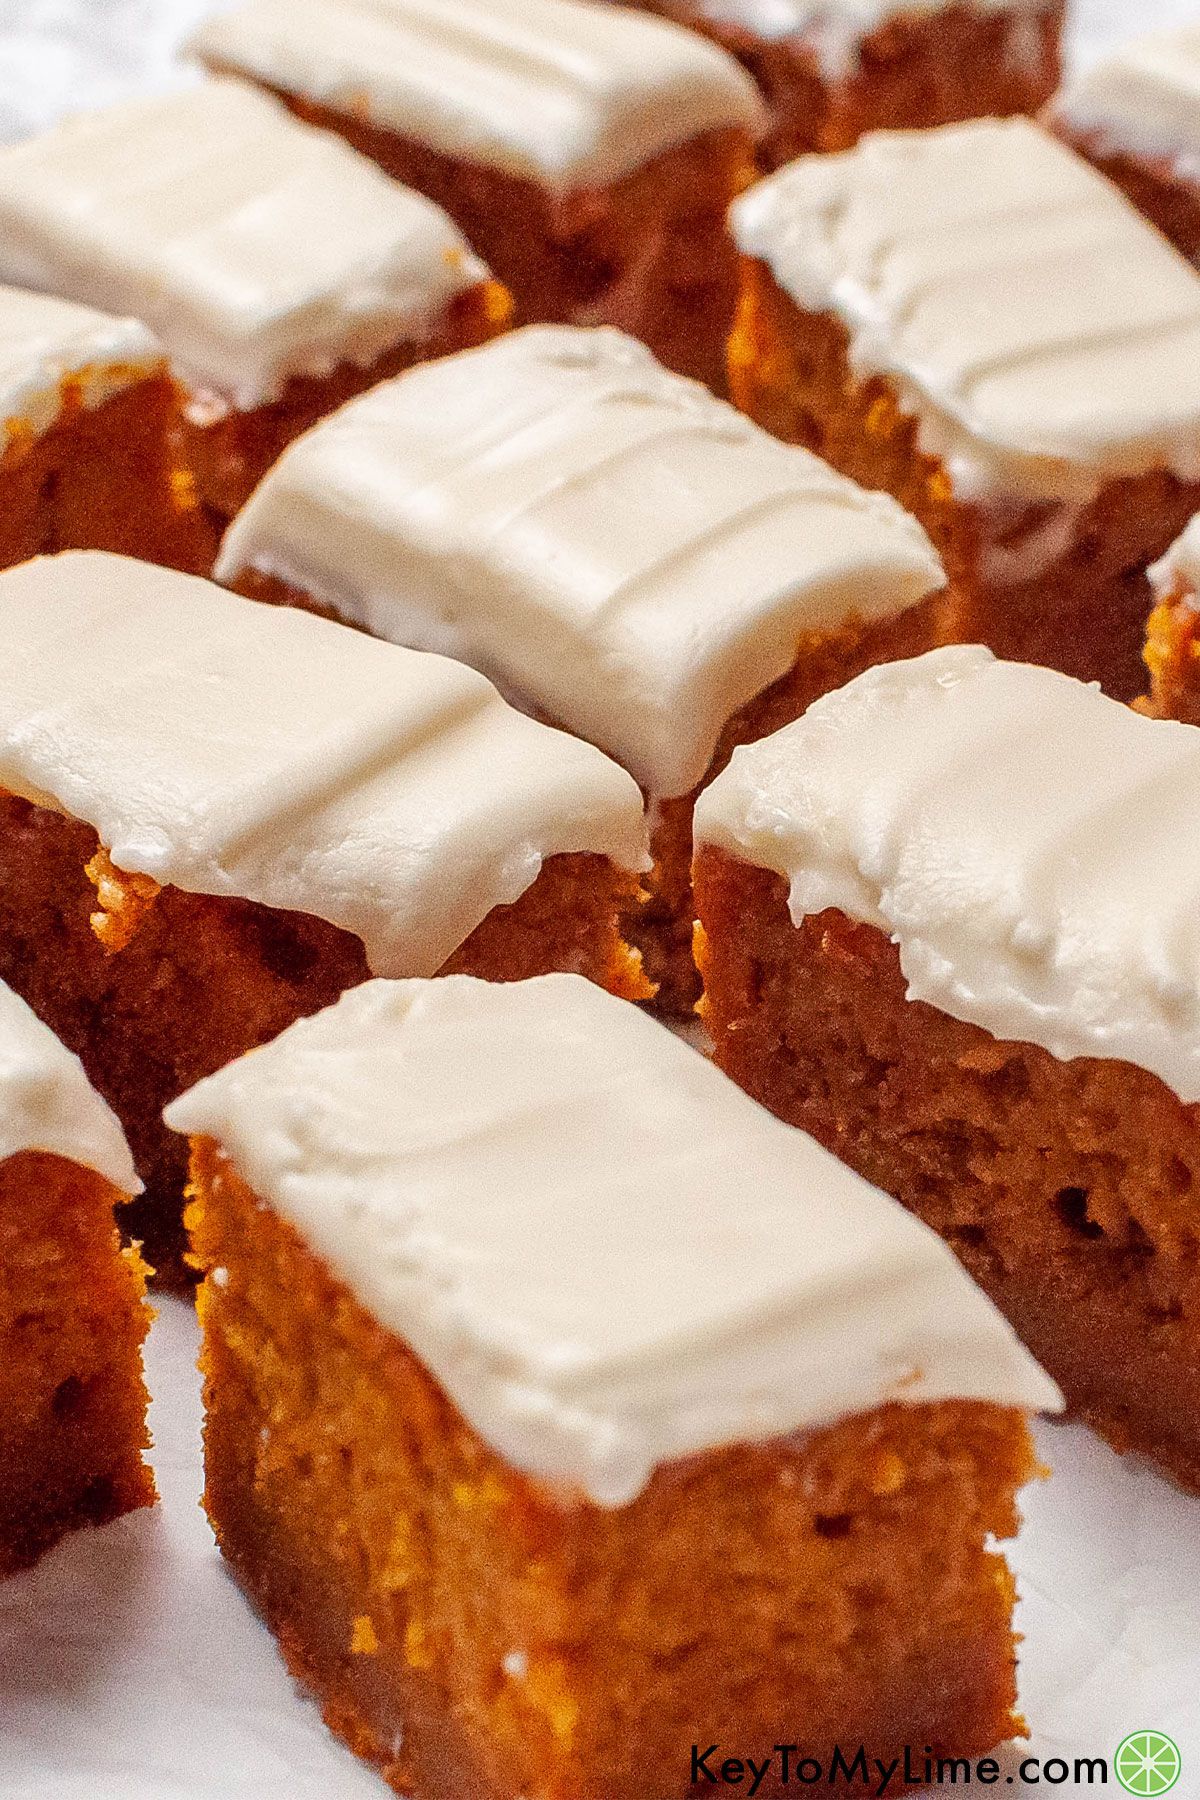 A close up image showing the inside texture of the pumpkin cake bars.